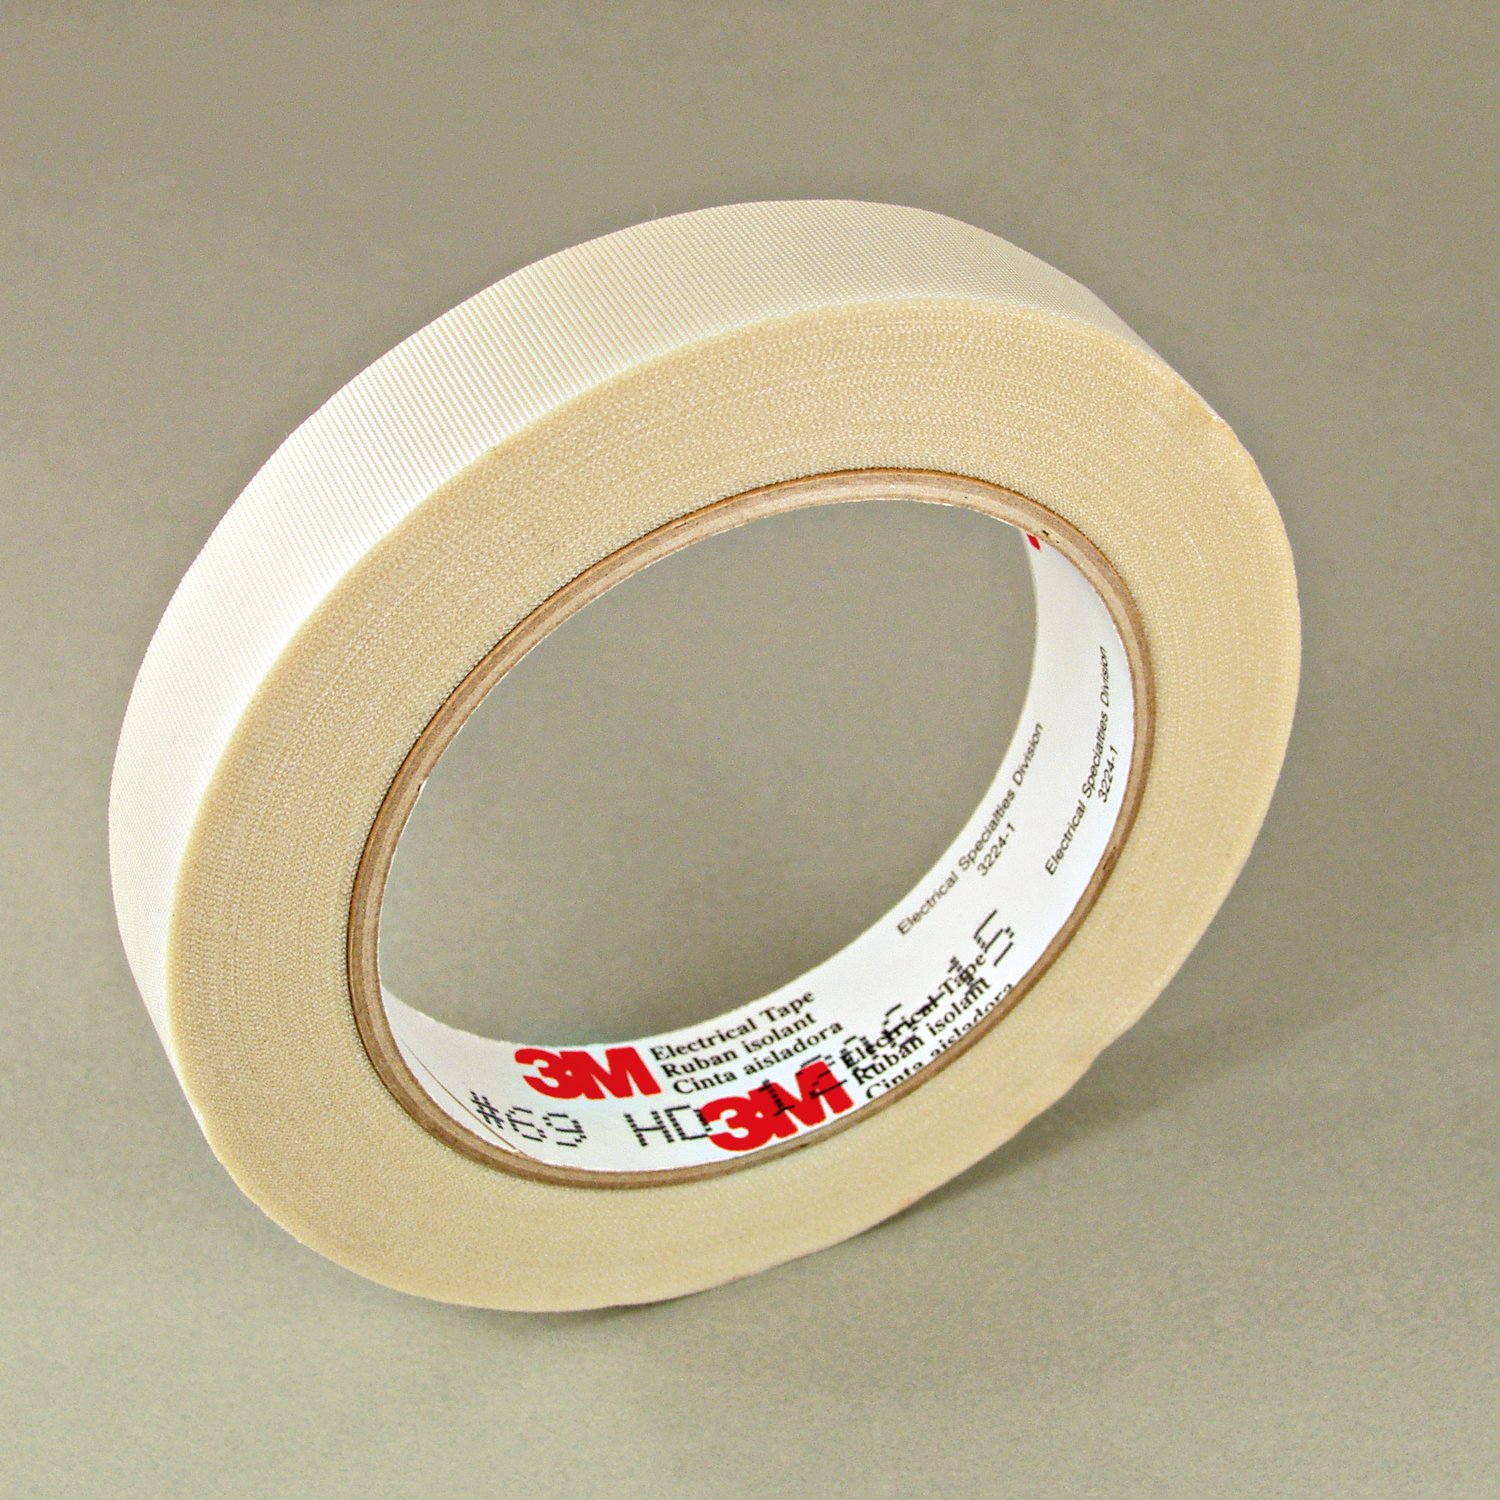 1-1/2" 3M 69 Glass Cloth Electrical Tape (3M69) with Silicone Adhesive 180°C, white, 1-1/2" wide x  36 YD roll